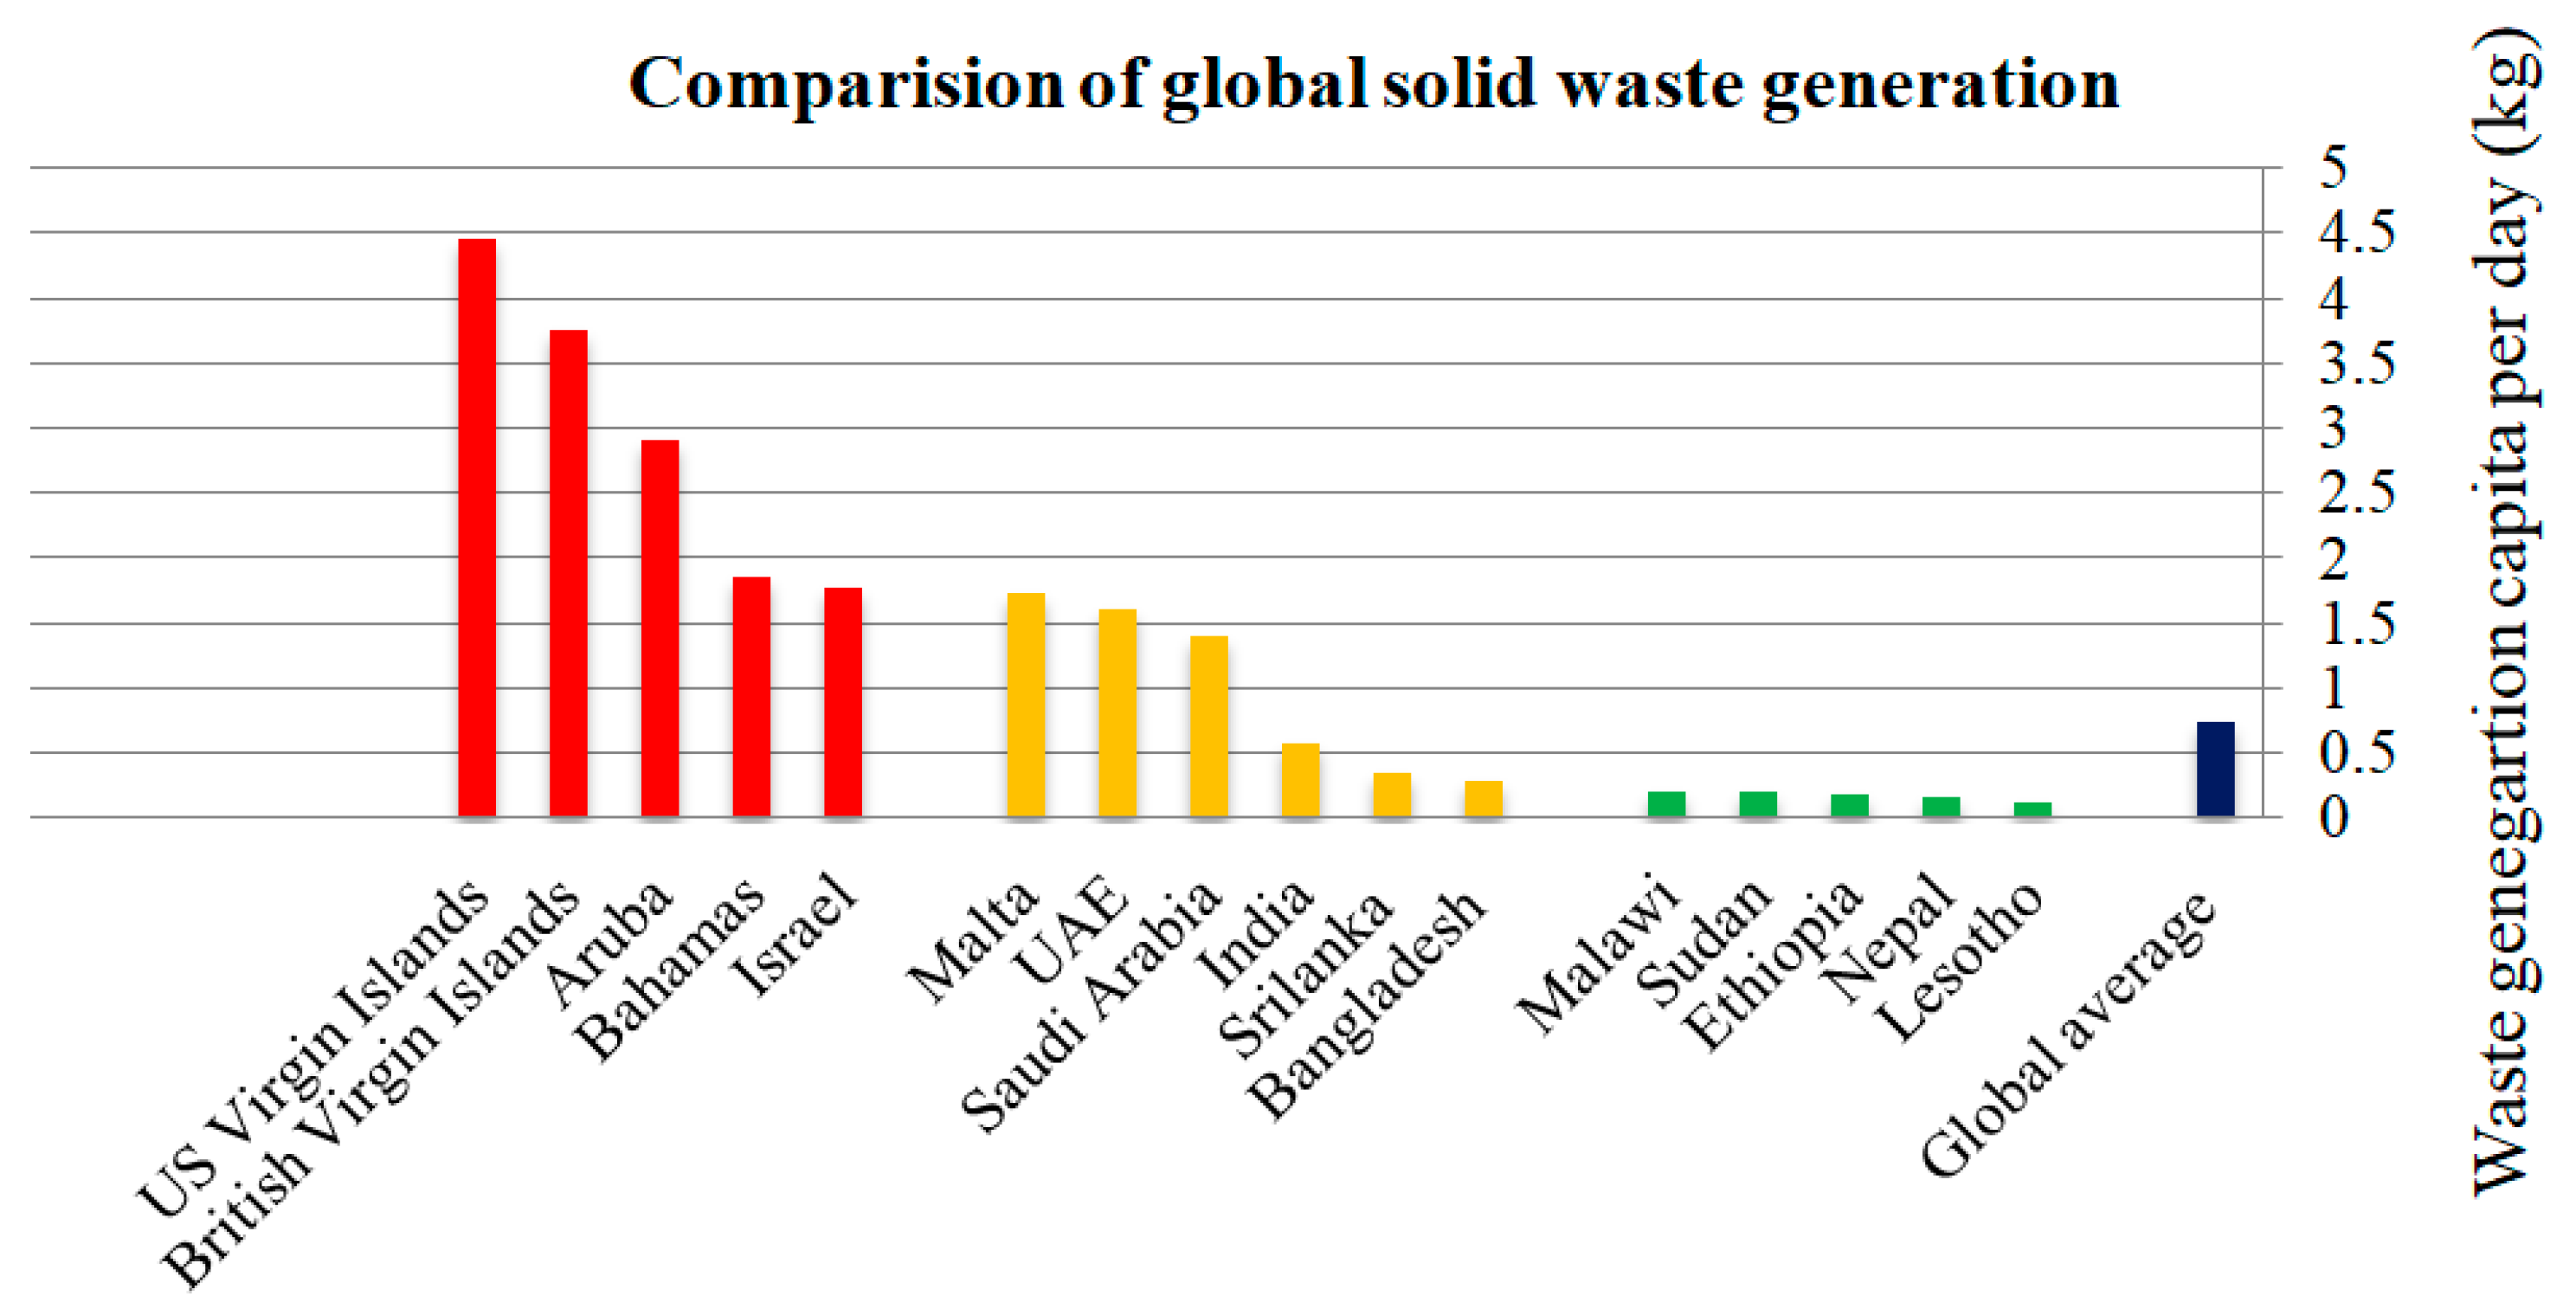 a case study of sustainable construction waste management in saudi arabia